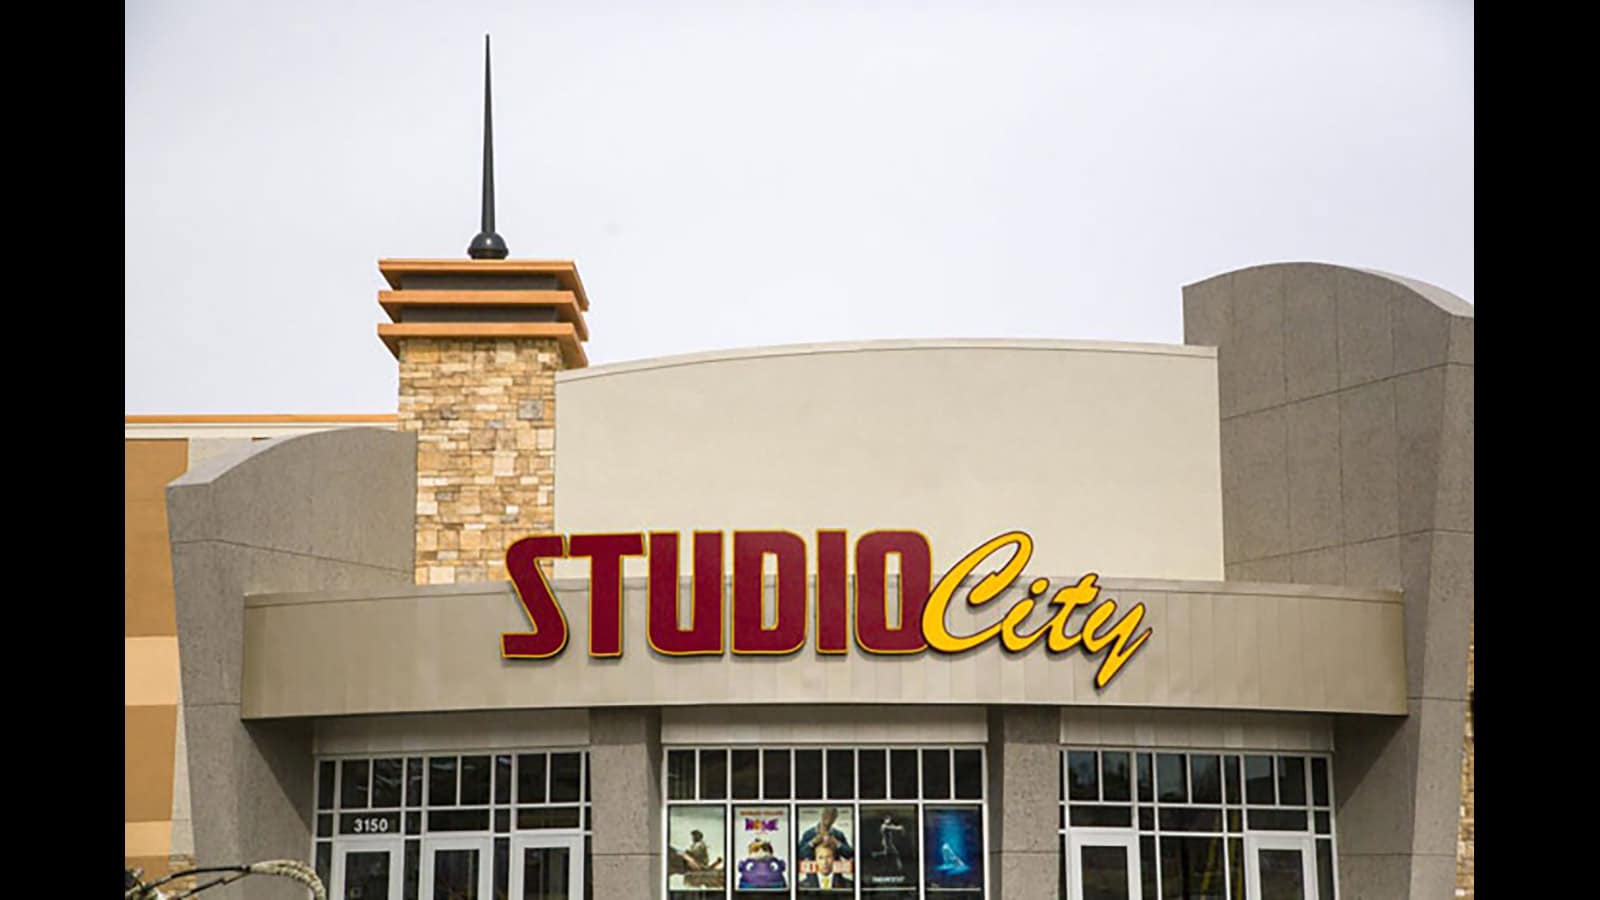 Wyoming's Studio City Mesa Gains Competitive Edge with Meyer Sound